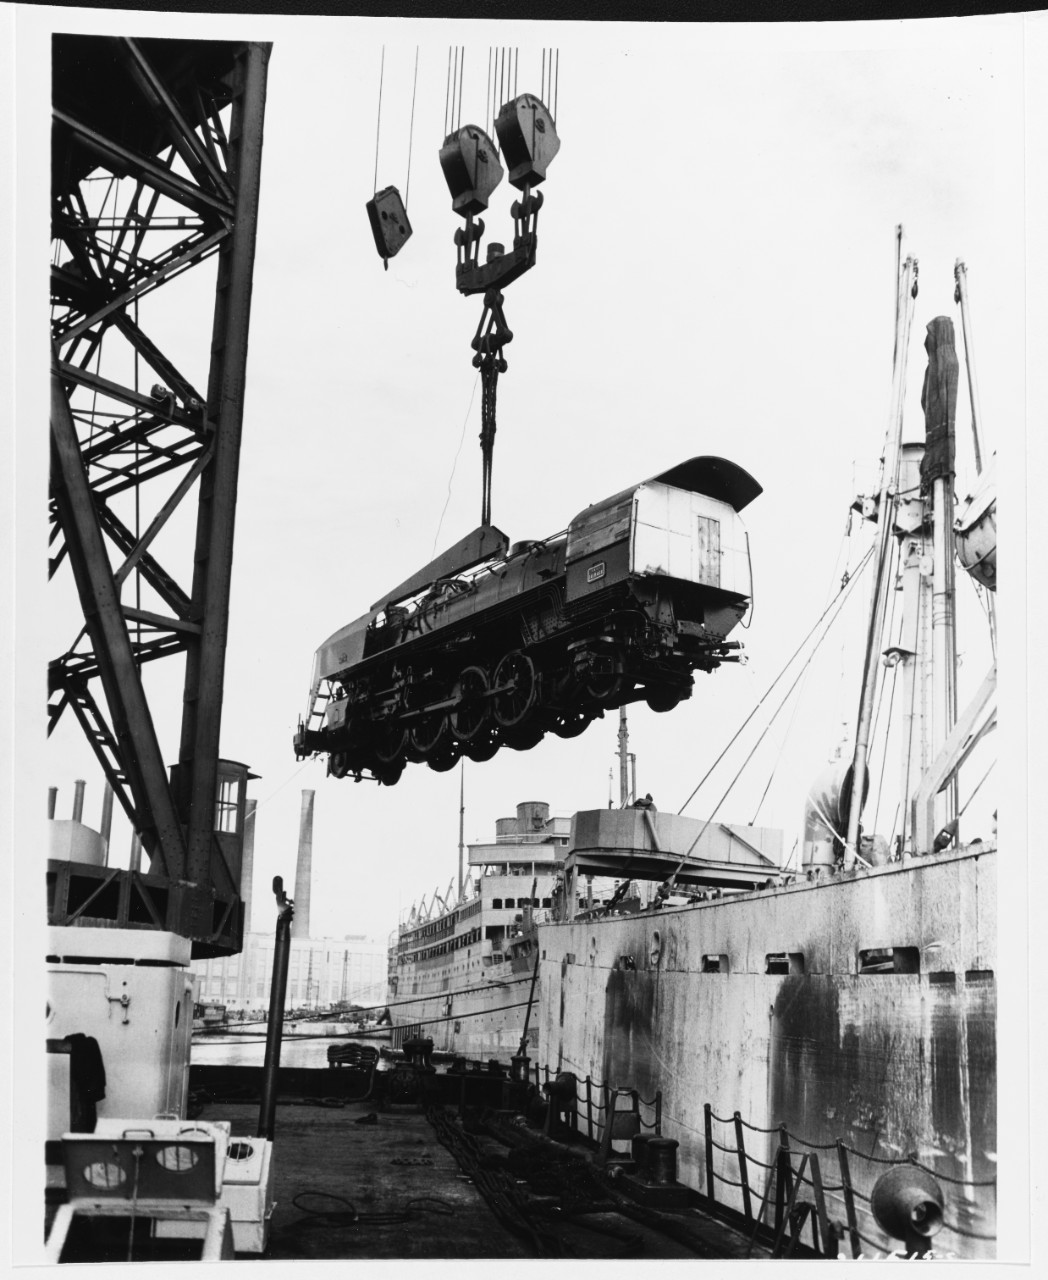 Marseille, France. One of the first U.S. locomotives for the French railroad system is unloaded from the Liberty ship HAROLD O. WILSON, on November 3, 1945